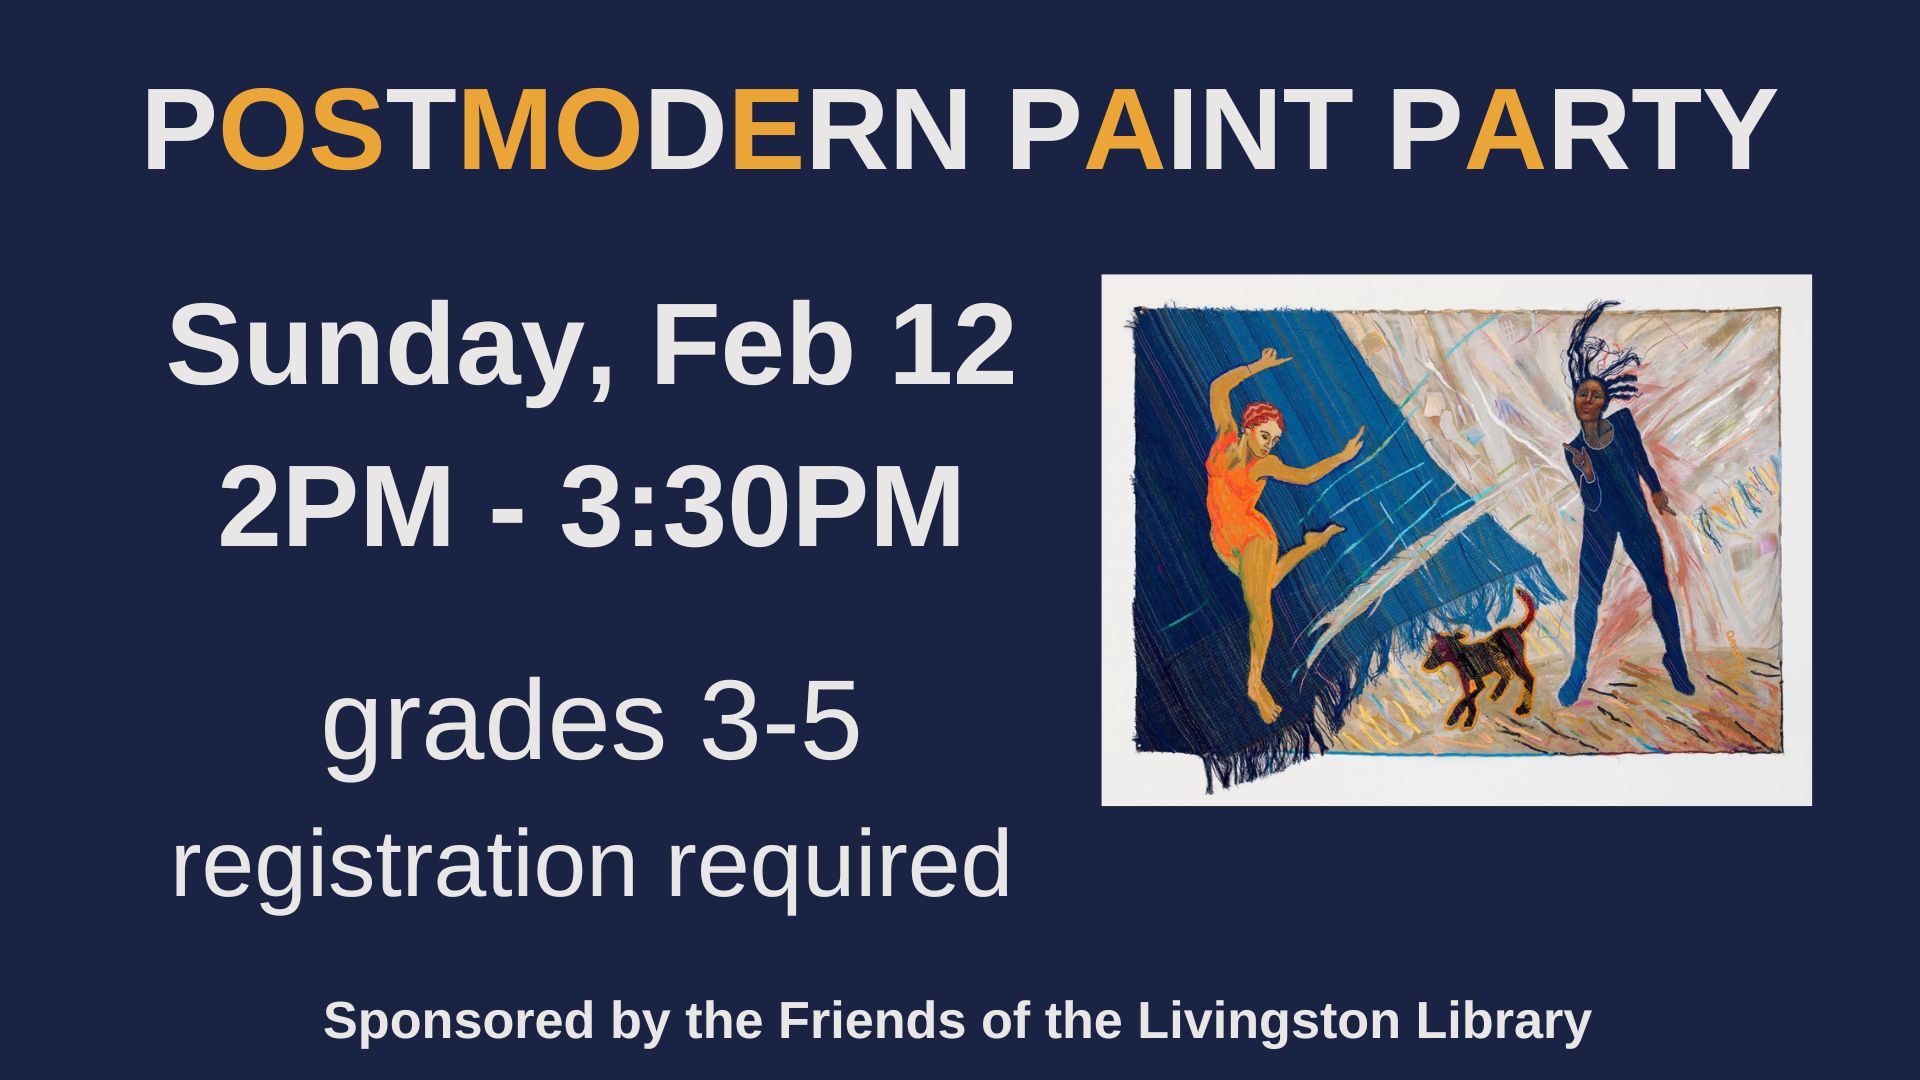 navy background with image of an emma amos painting with the text postmodern paint party